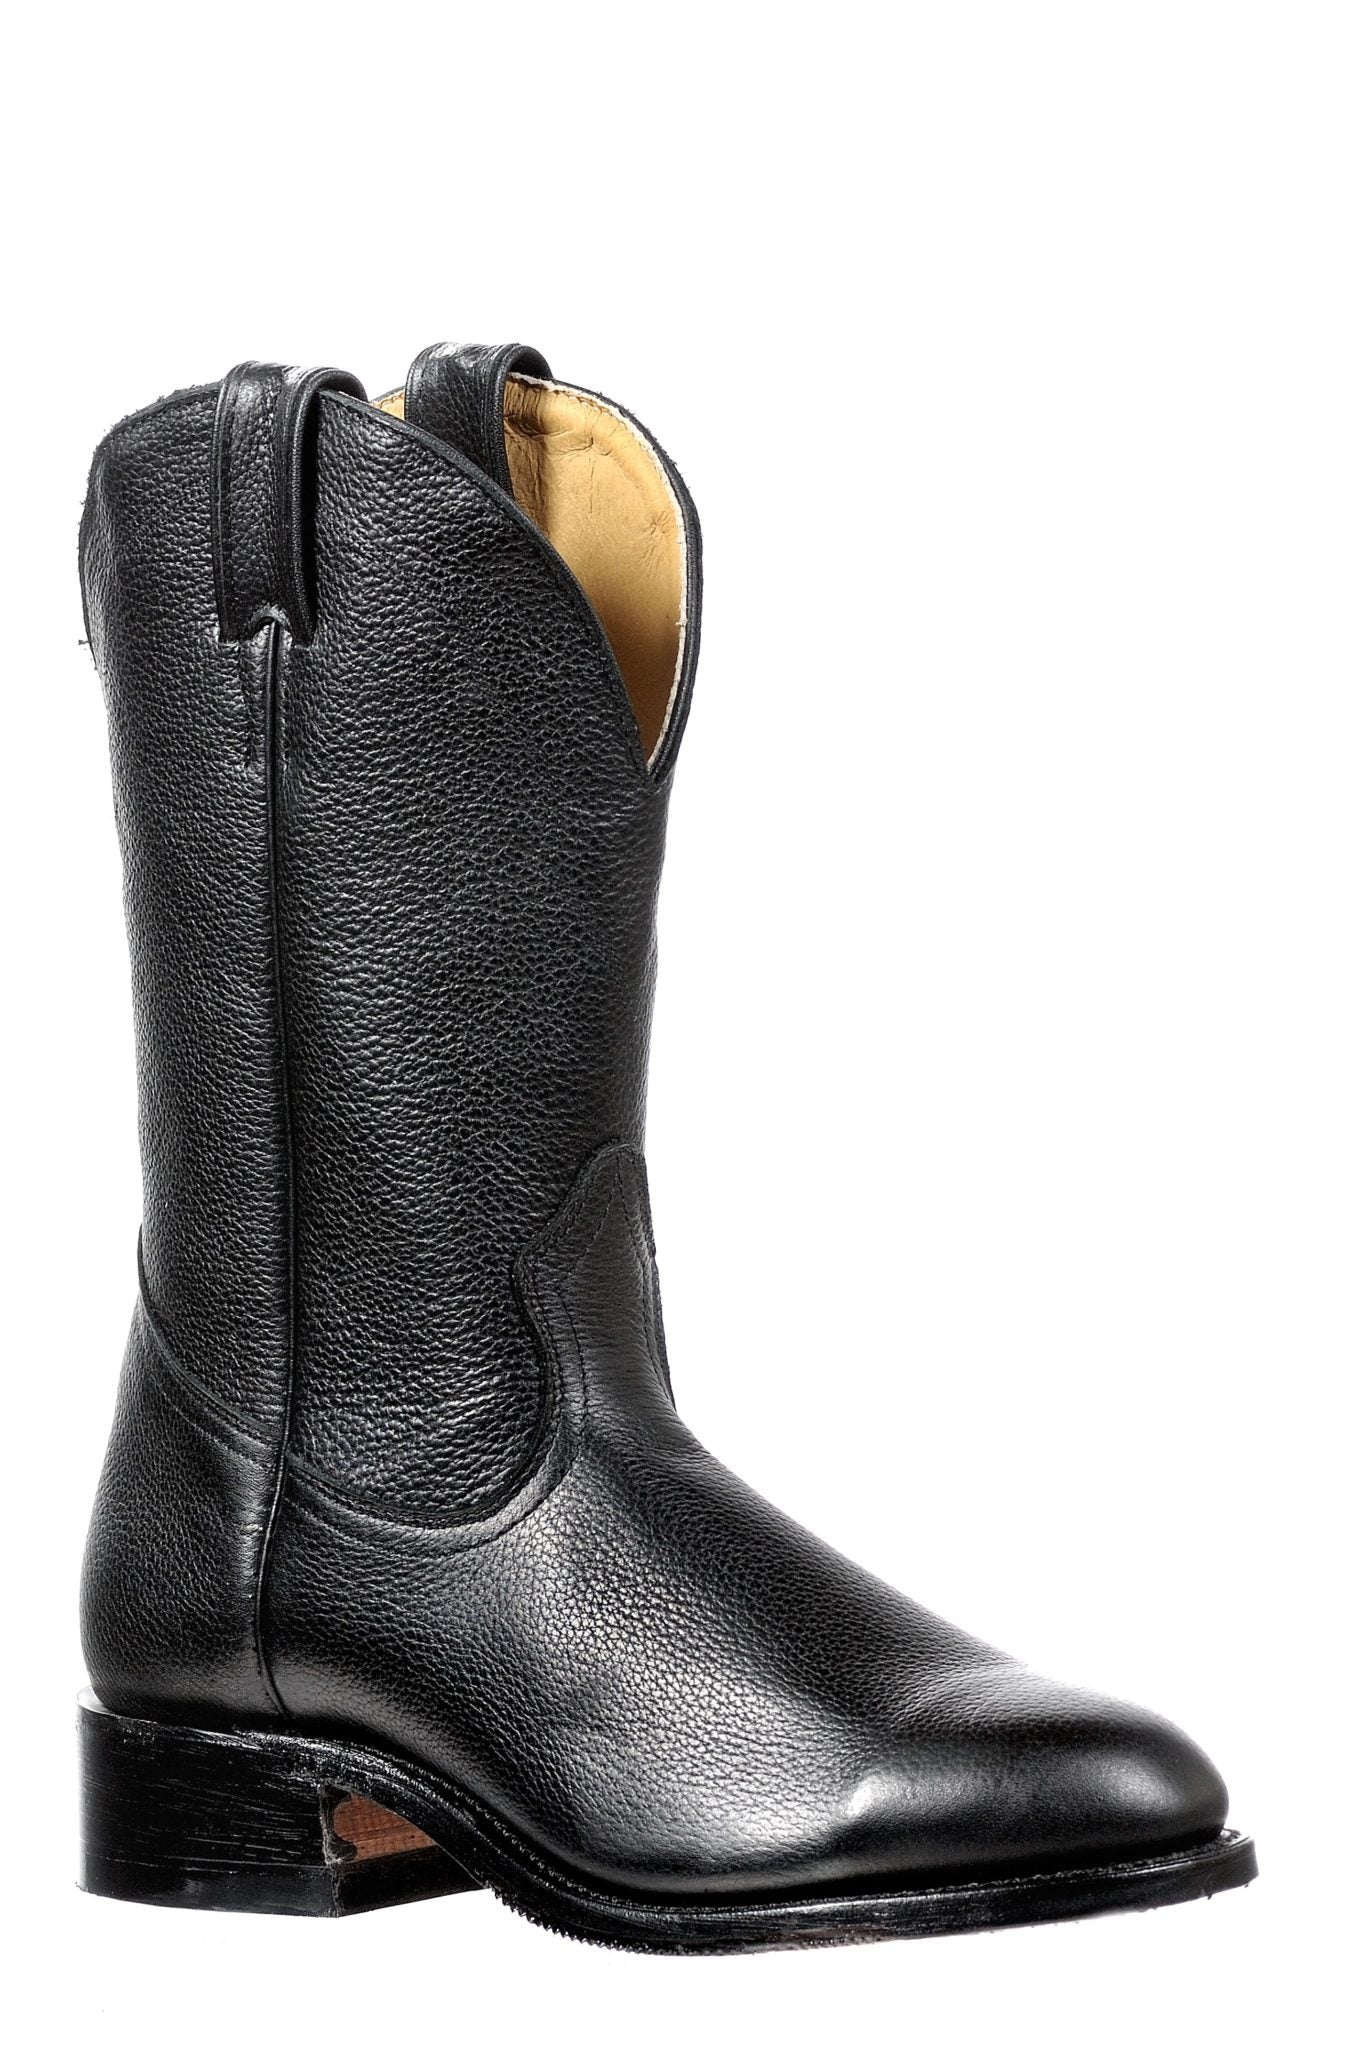 Boot Women's (0375) - 11" Round Toe in Sporty Black